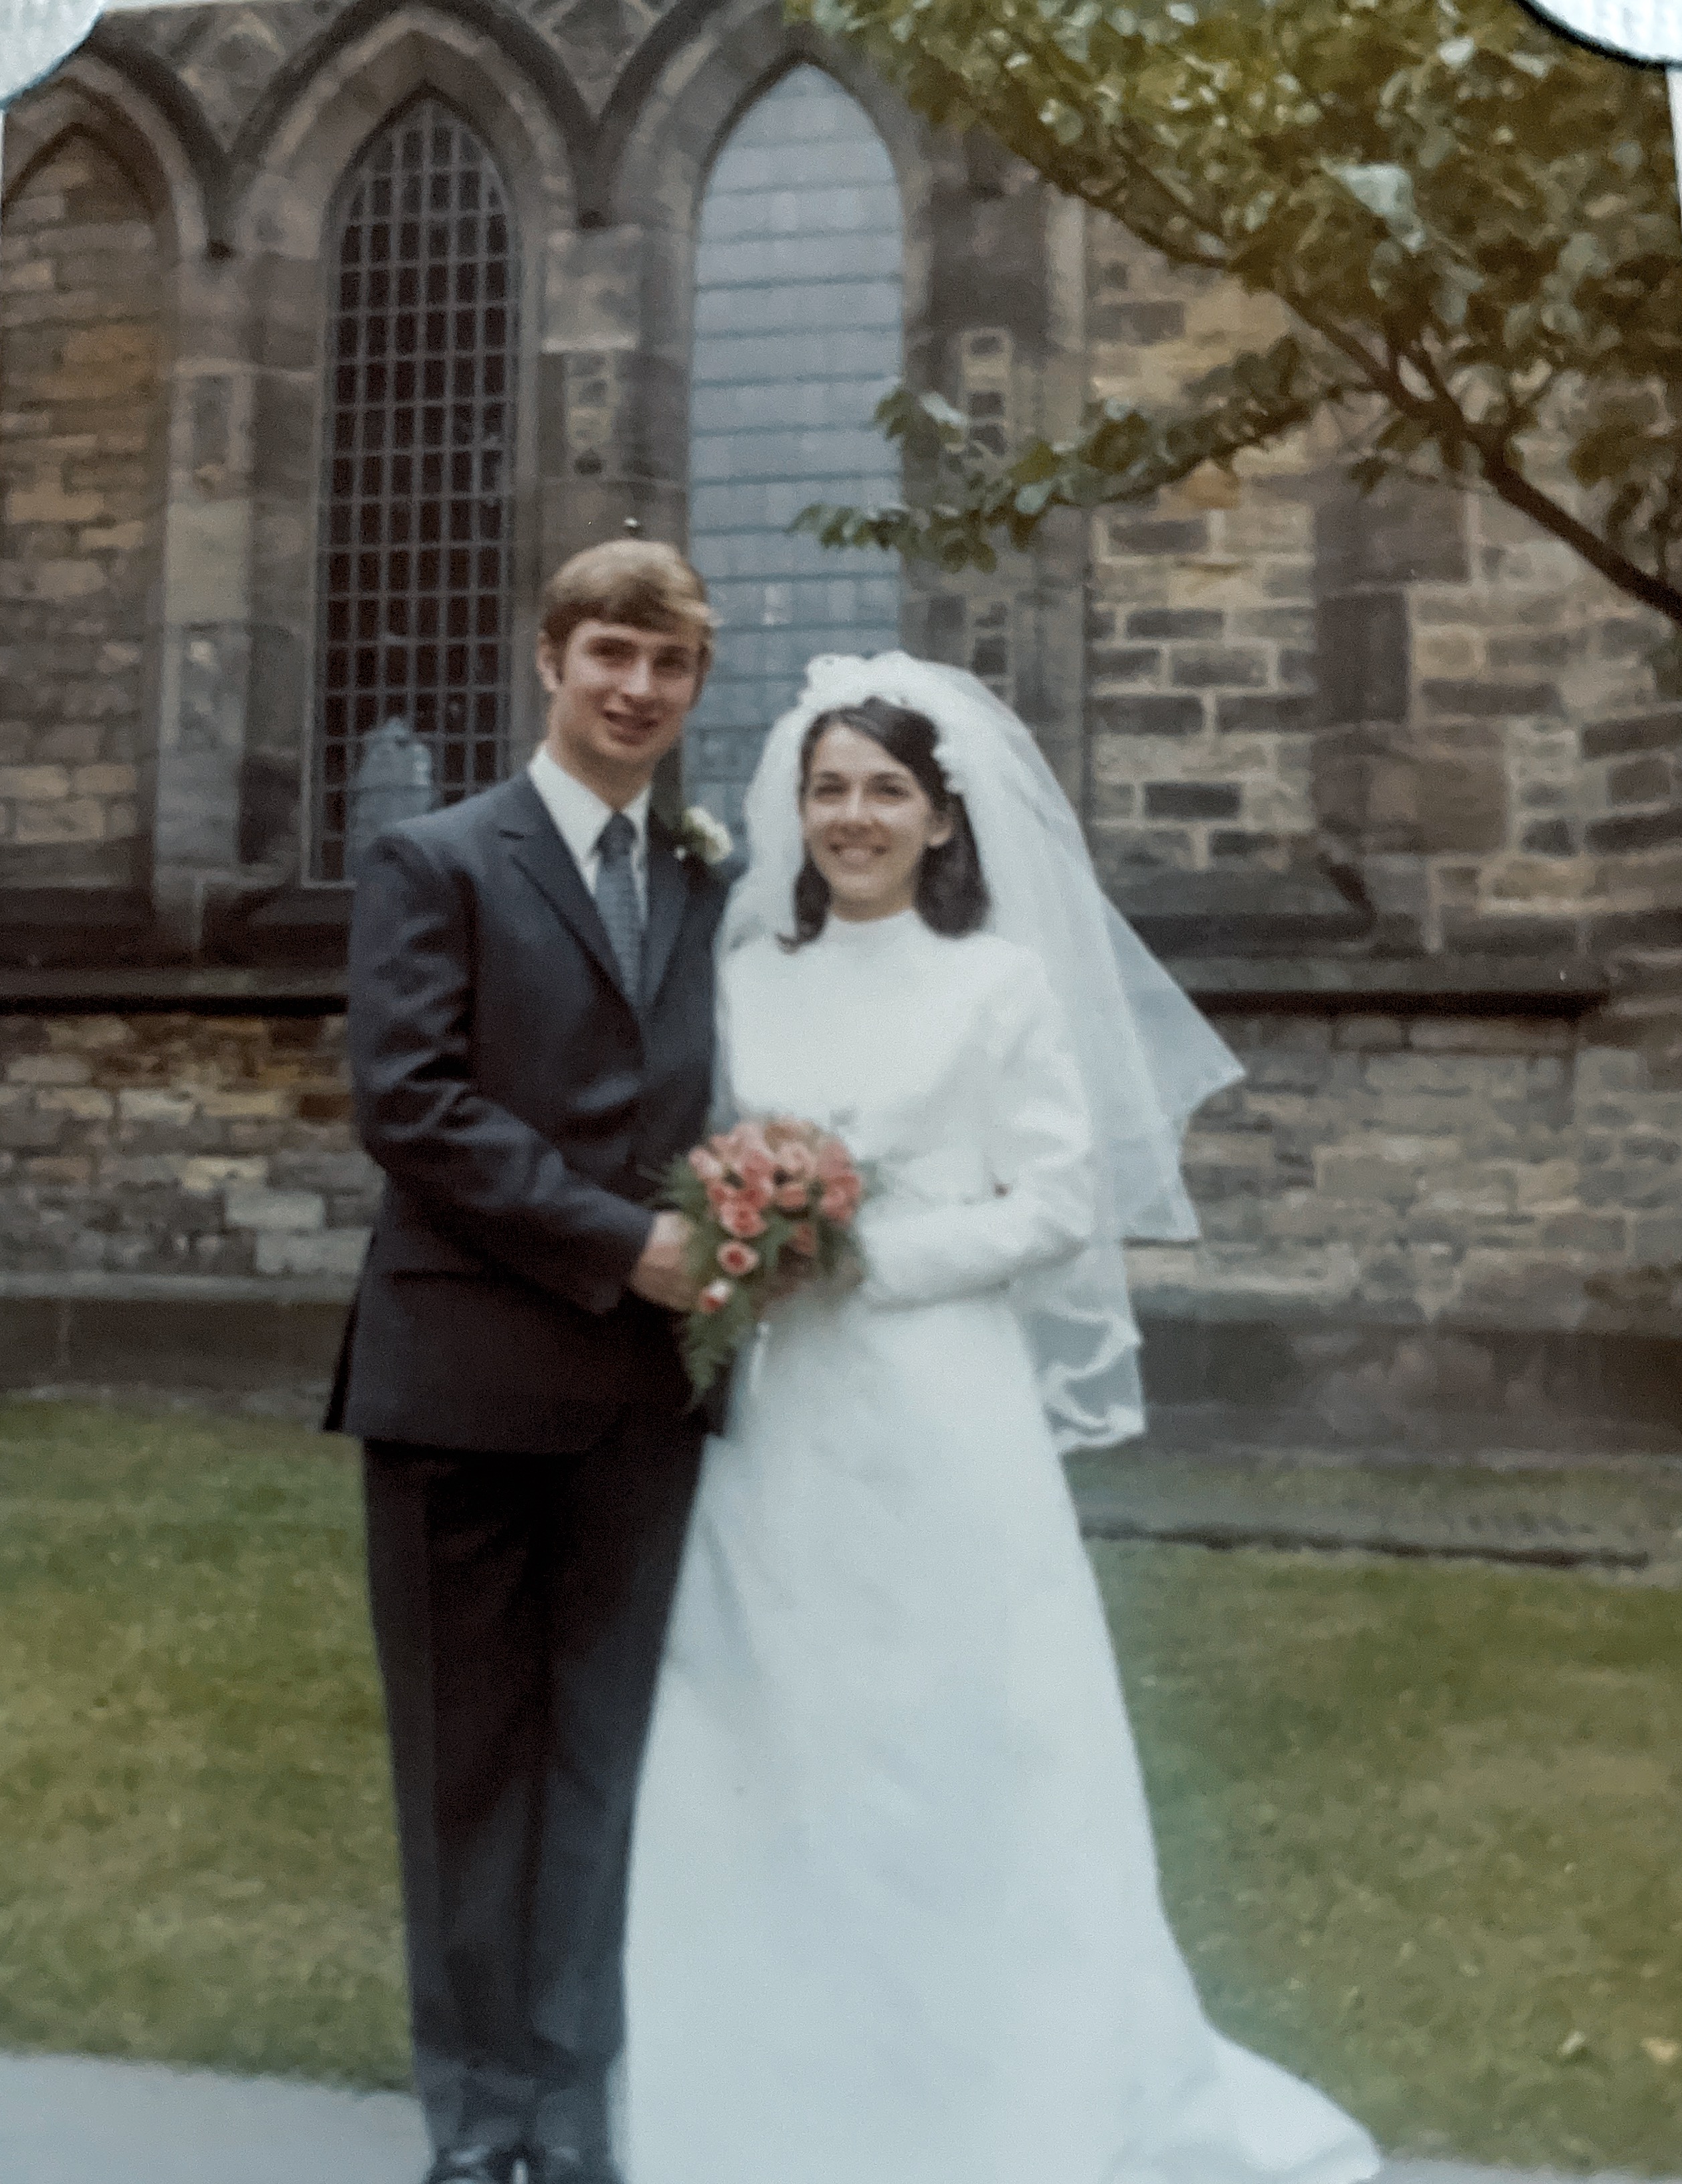 August 26th 1972 50 years of marriage last August.